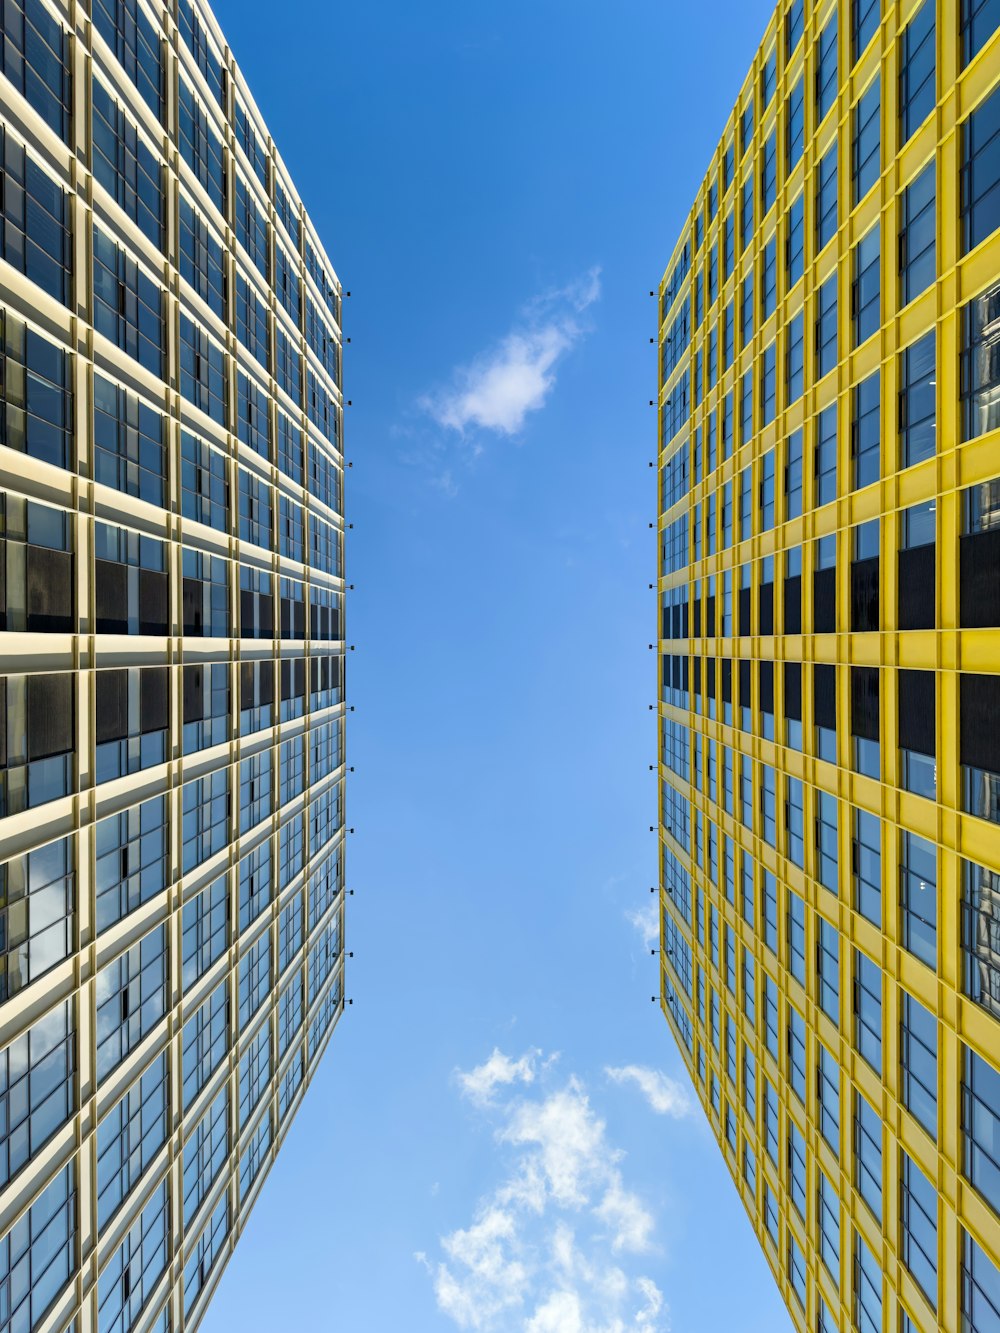 two tall buildings with windows and a blue sky in the background